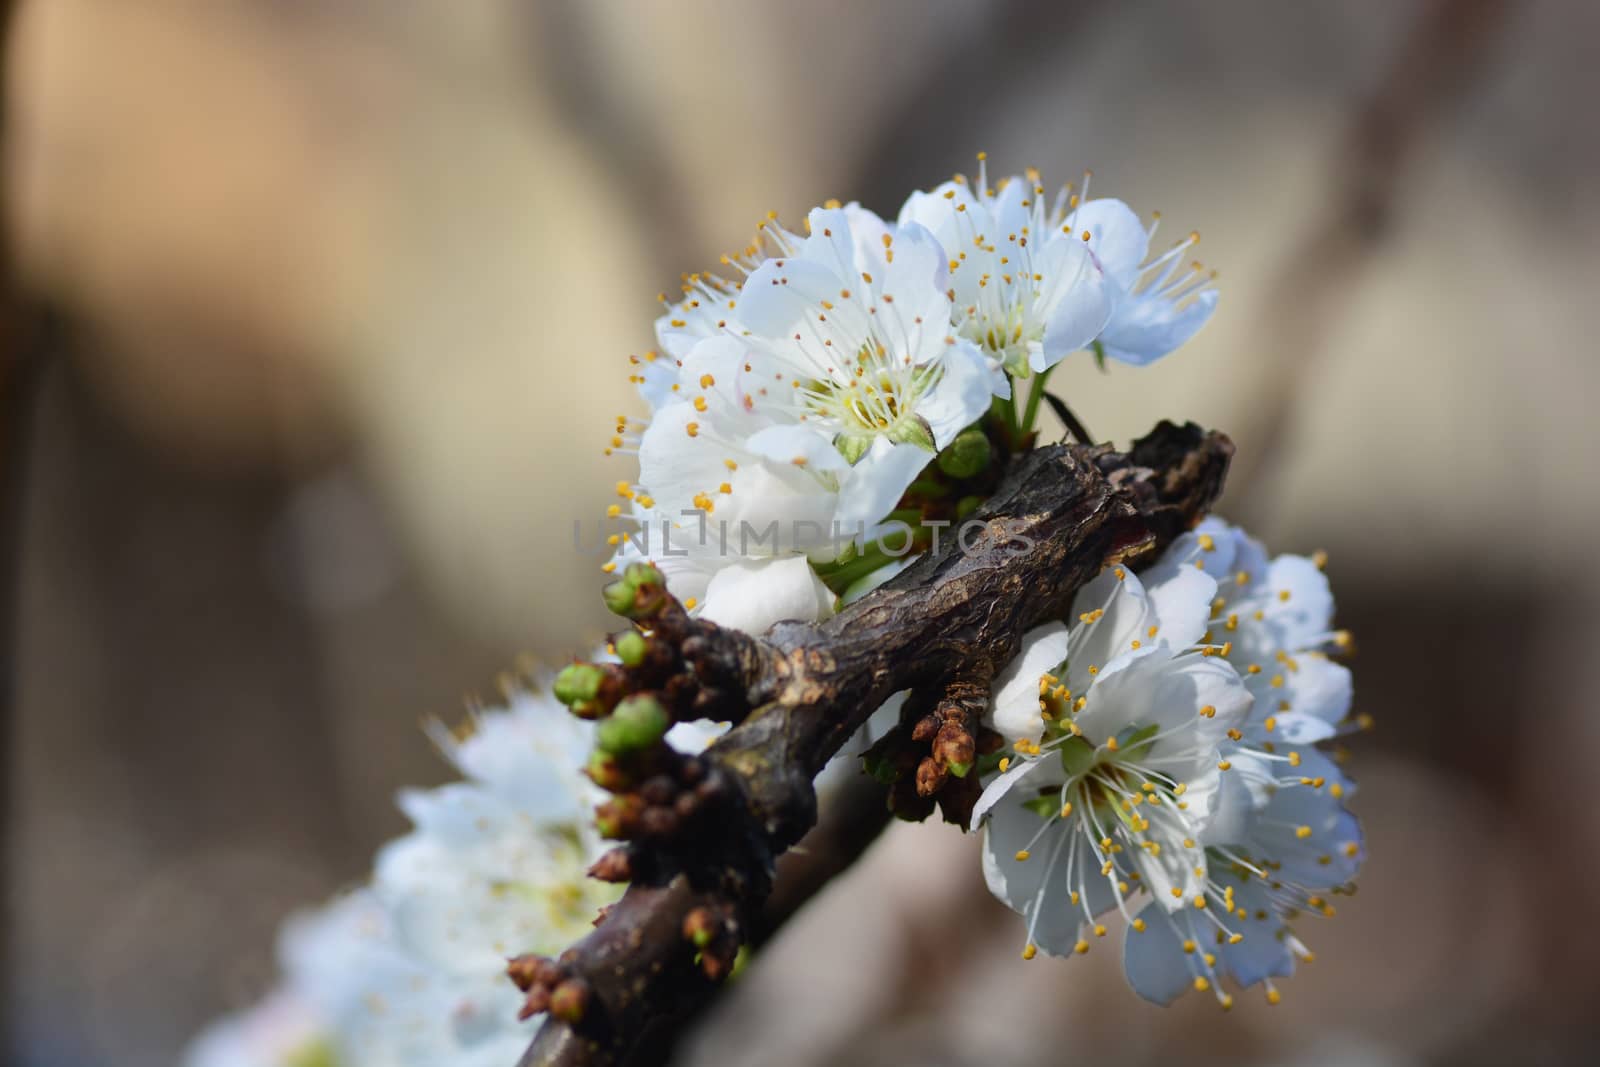 Blooming White Chinese plum flower or Japanese apricot, Korean green plum, East Asia, is usually called plum blossom